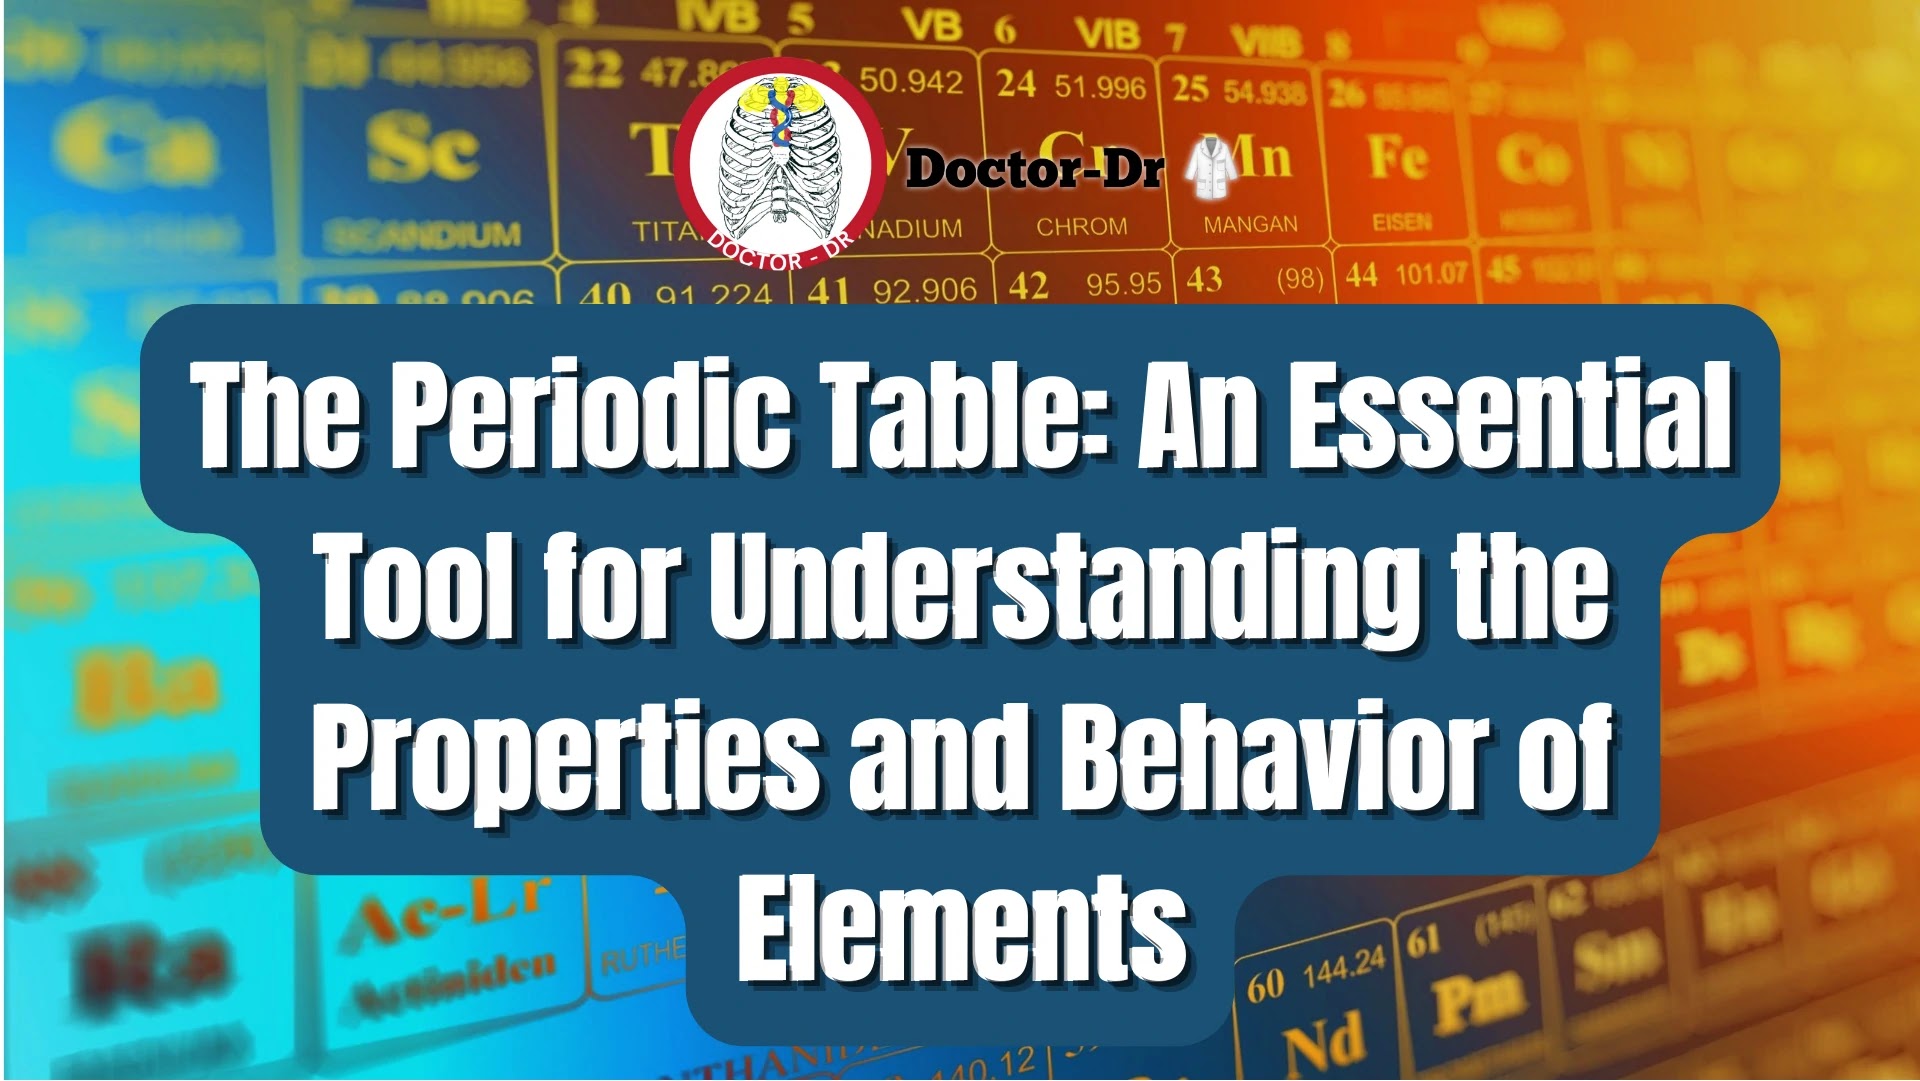 The Periodic Table: An Essential Tool for Understanding the Properties and Behavior of Elements